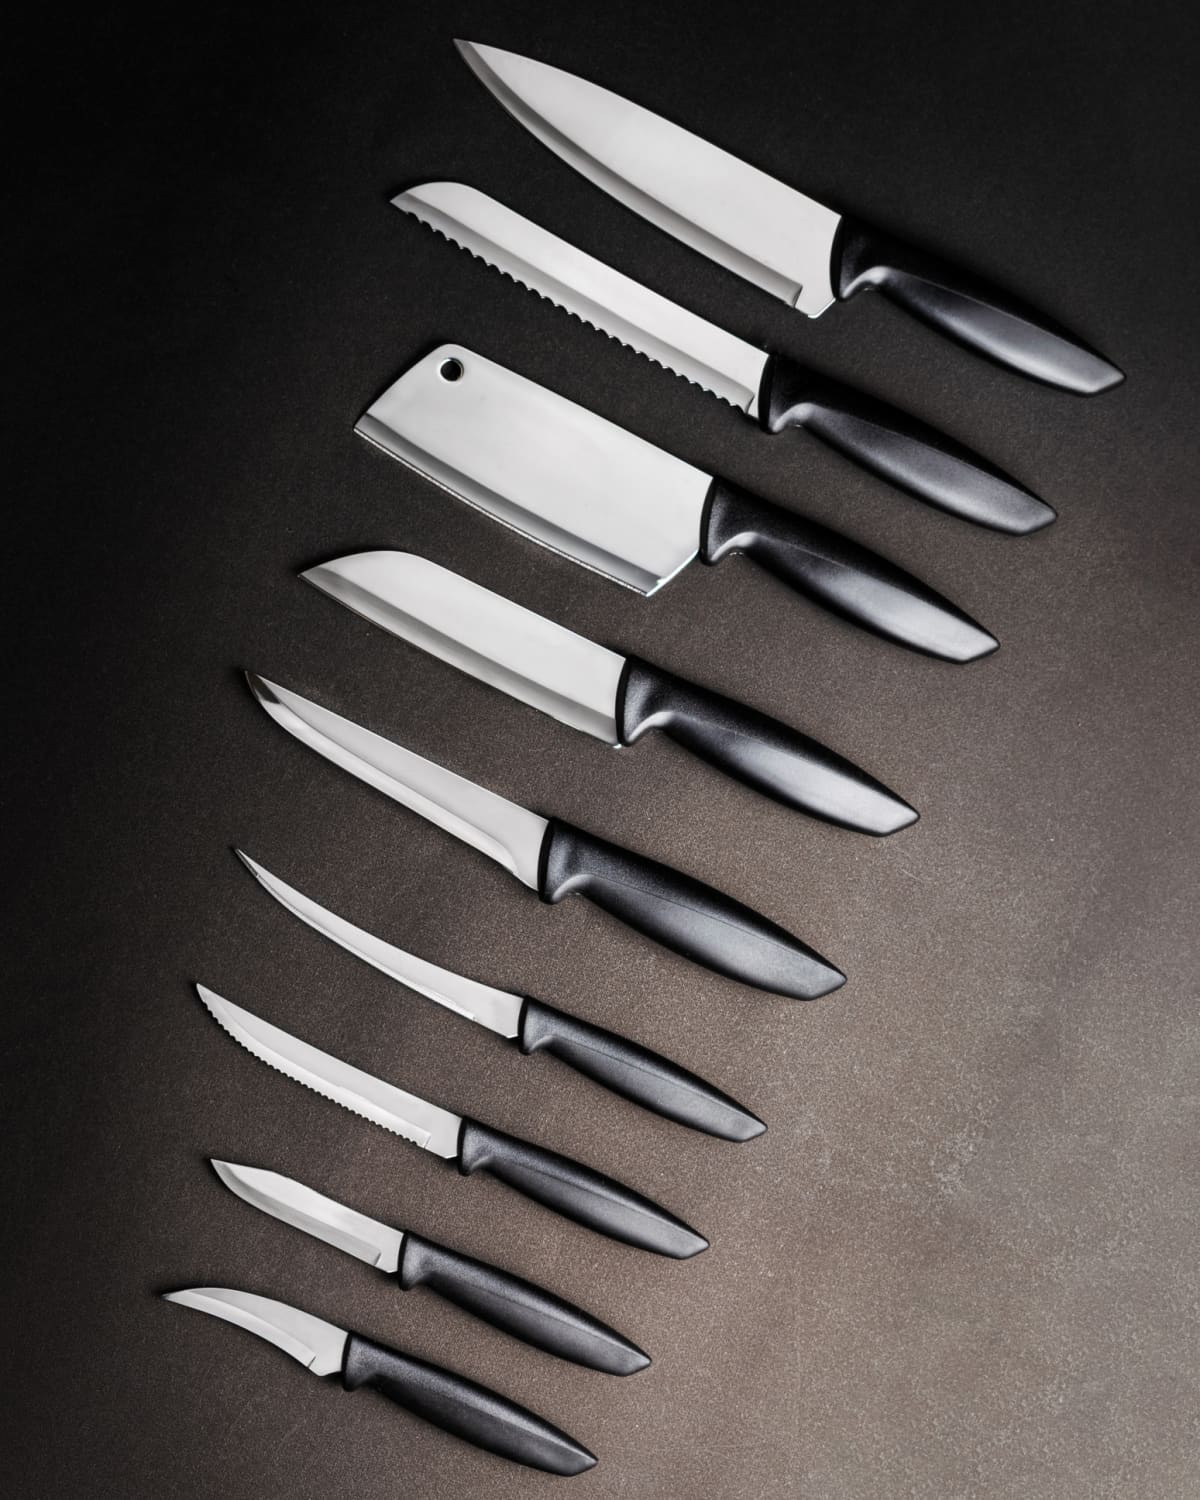 Knife kitchen cooking utensil isolated on a black background